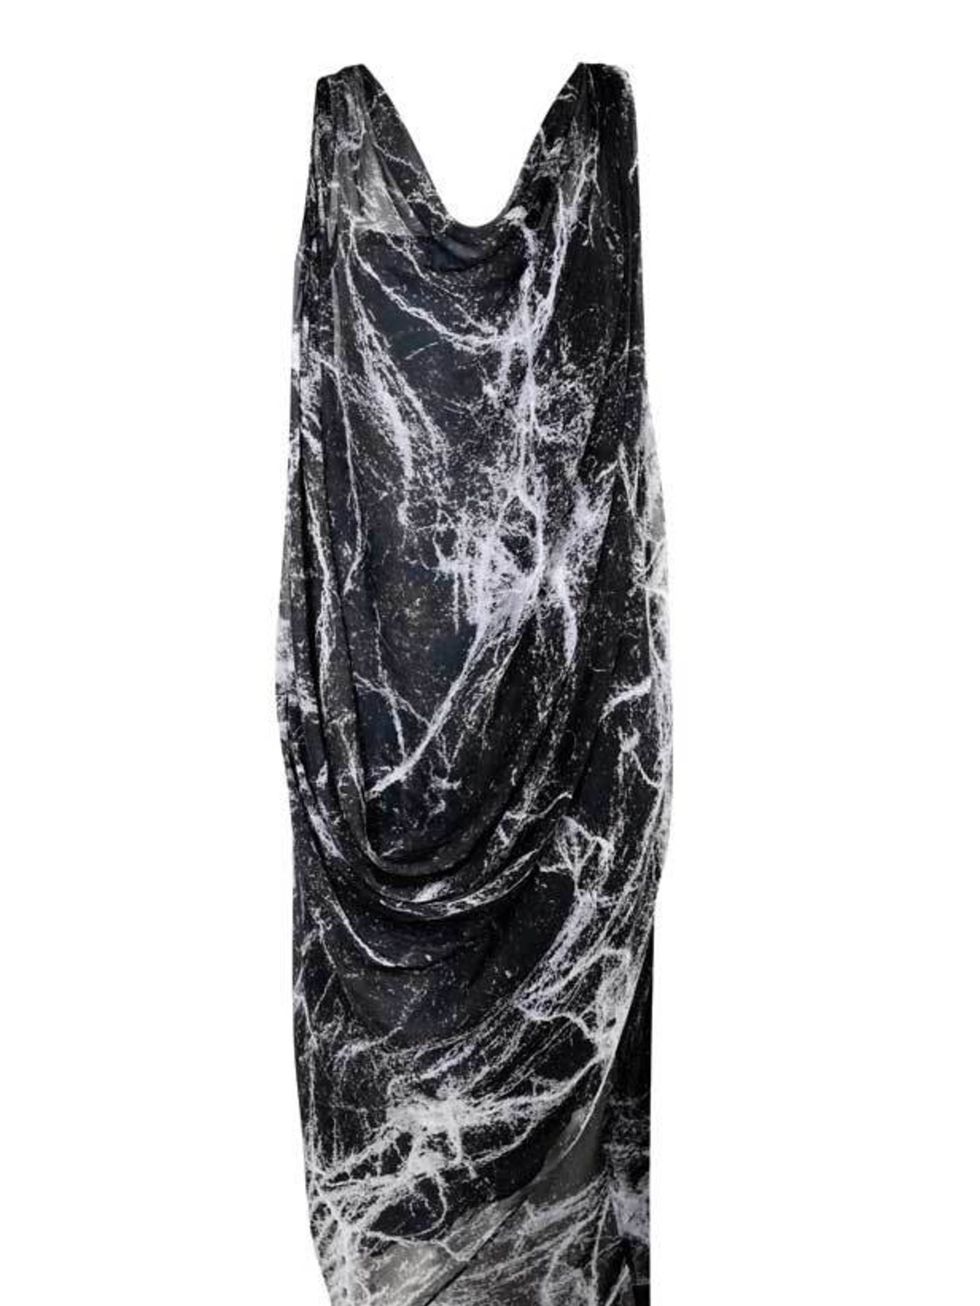 <p>This week Warehouse launches a brand new collection with graduate designer Daisy Craver. Cool, edgy and nailing the digital print trend, this dress is one of our favourites from the rock chick collection. <a href="http://www.elleuk.com/news/Fashion-New